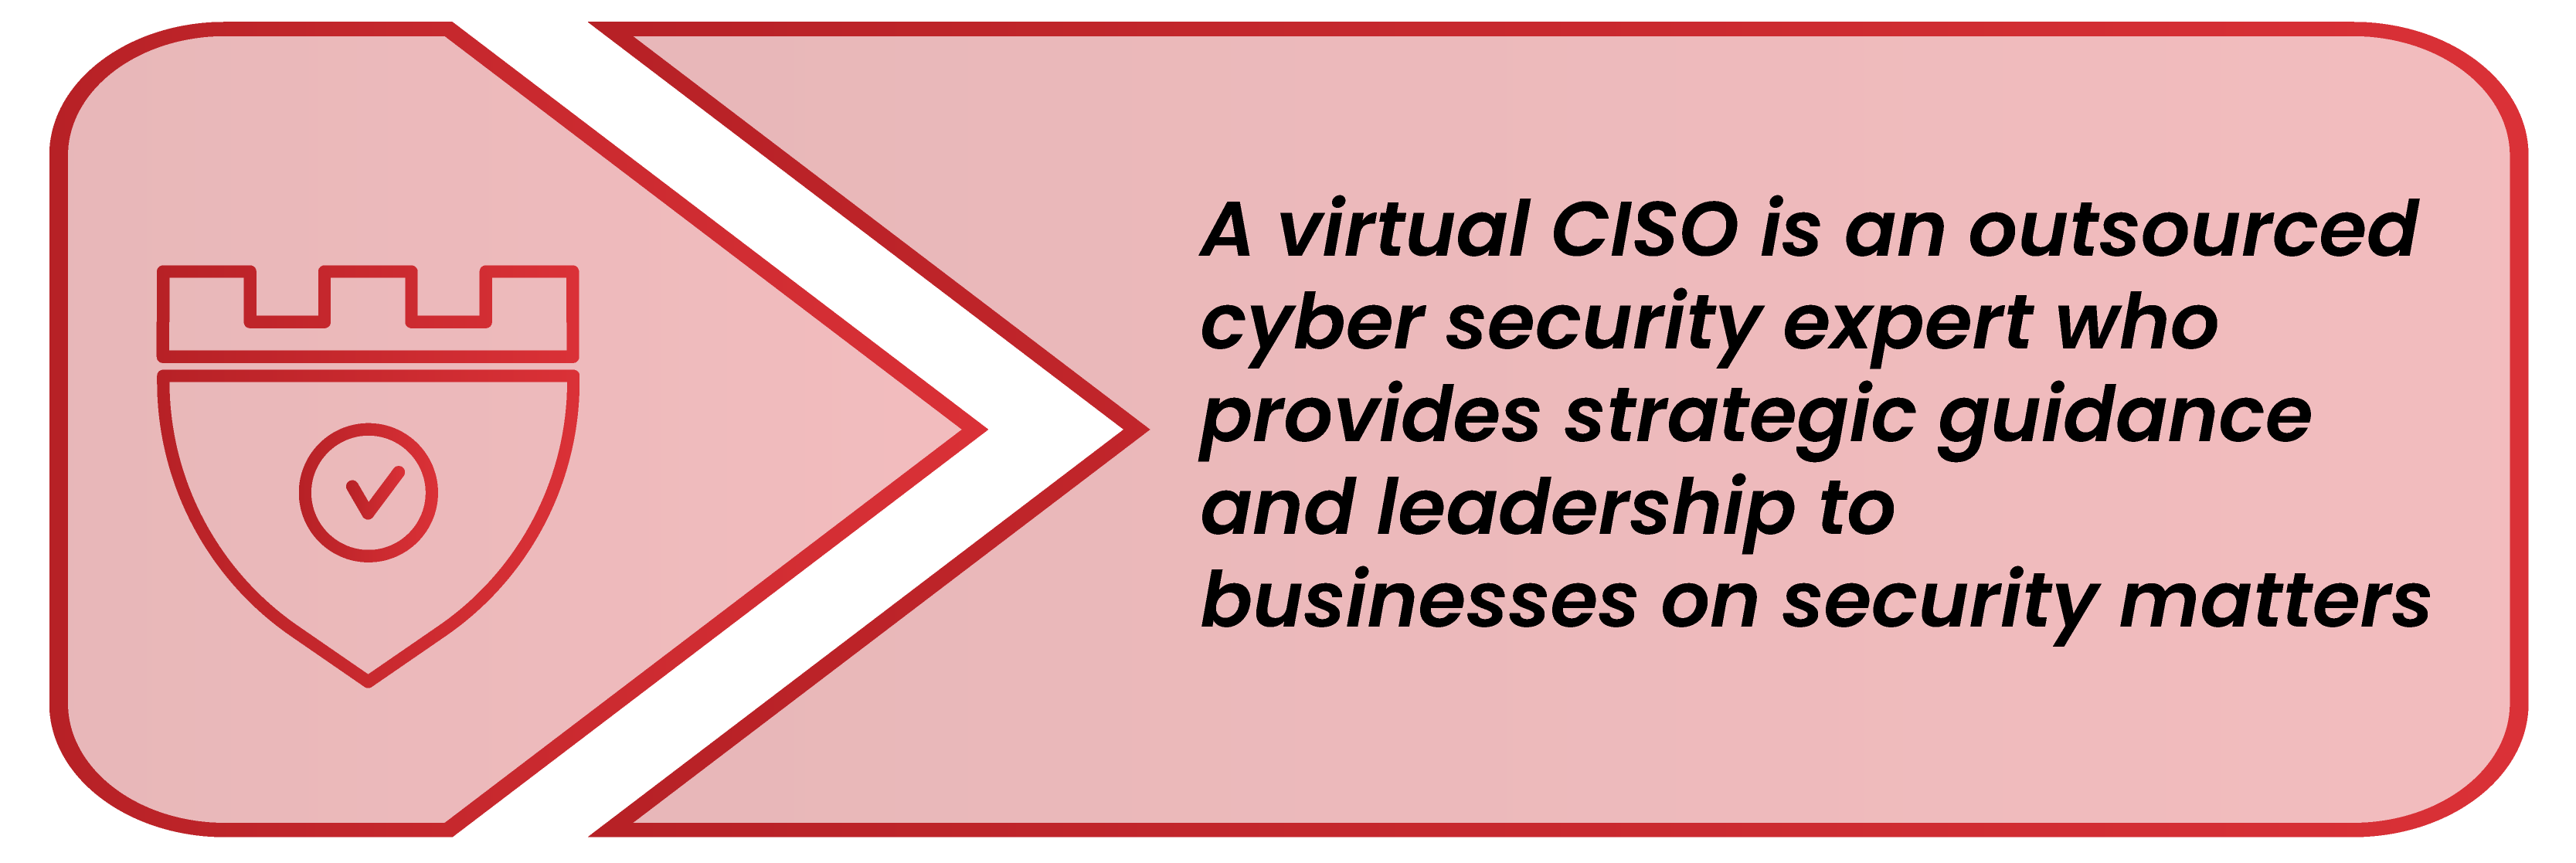 What is a Virtual CISO?